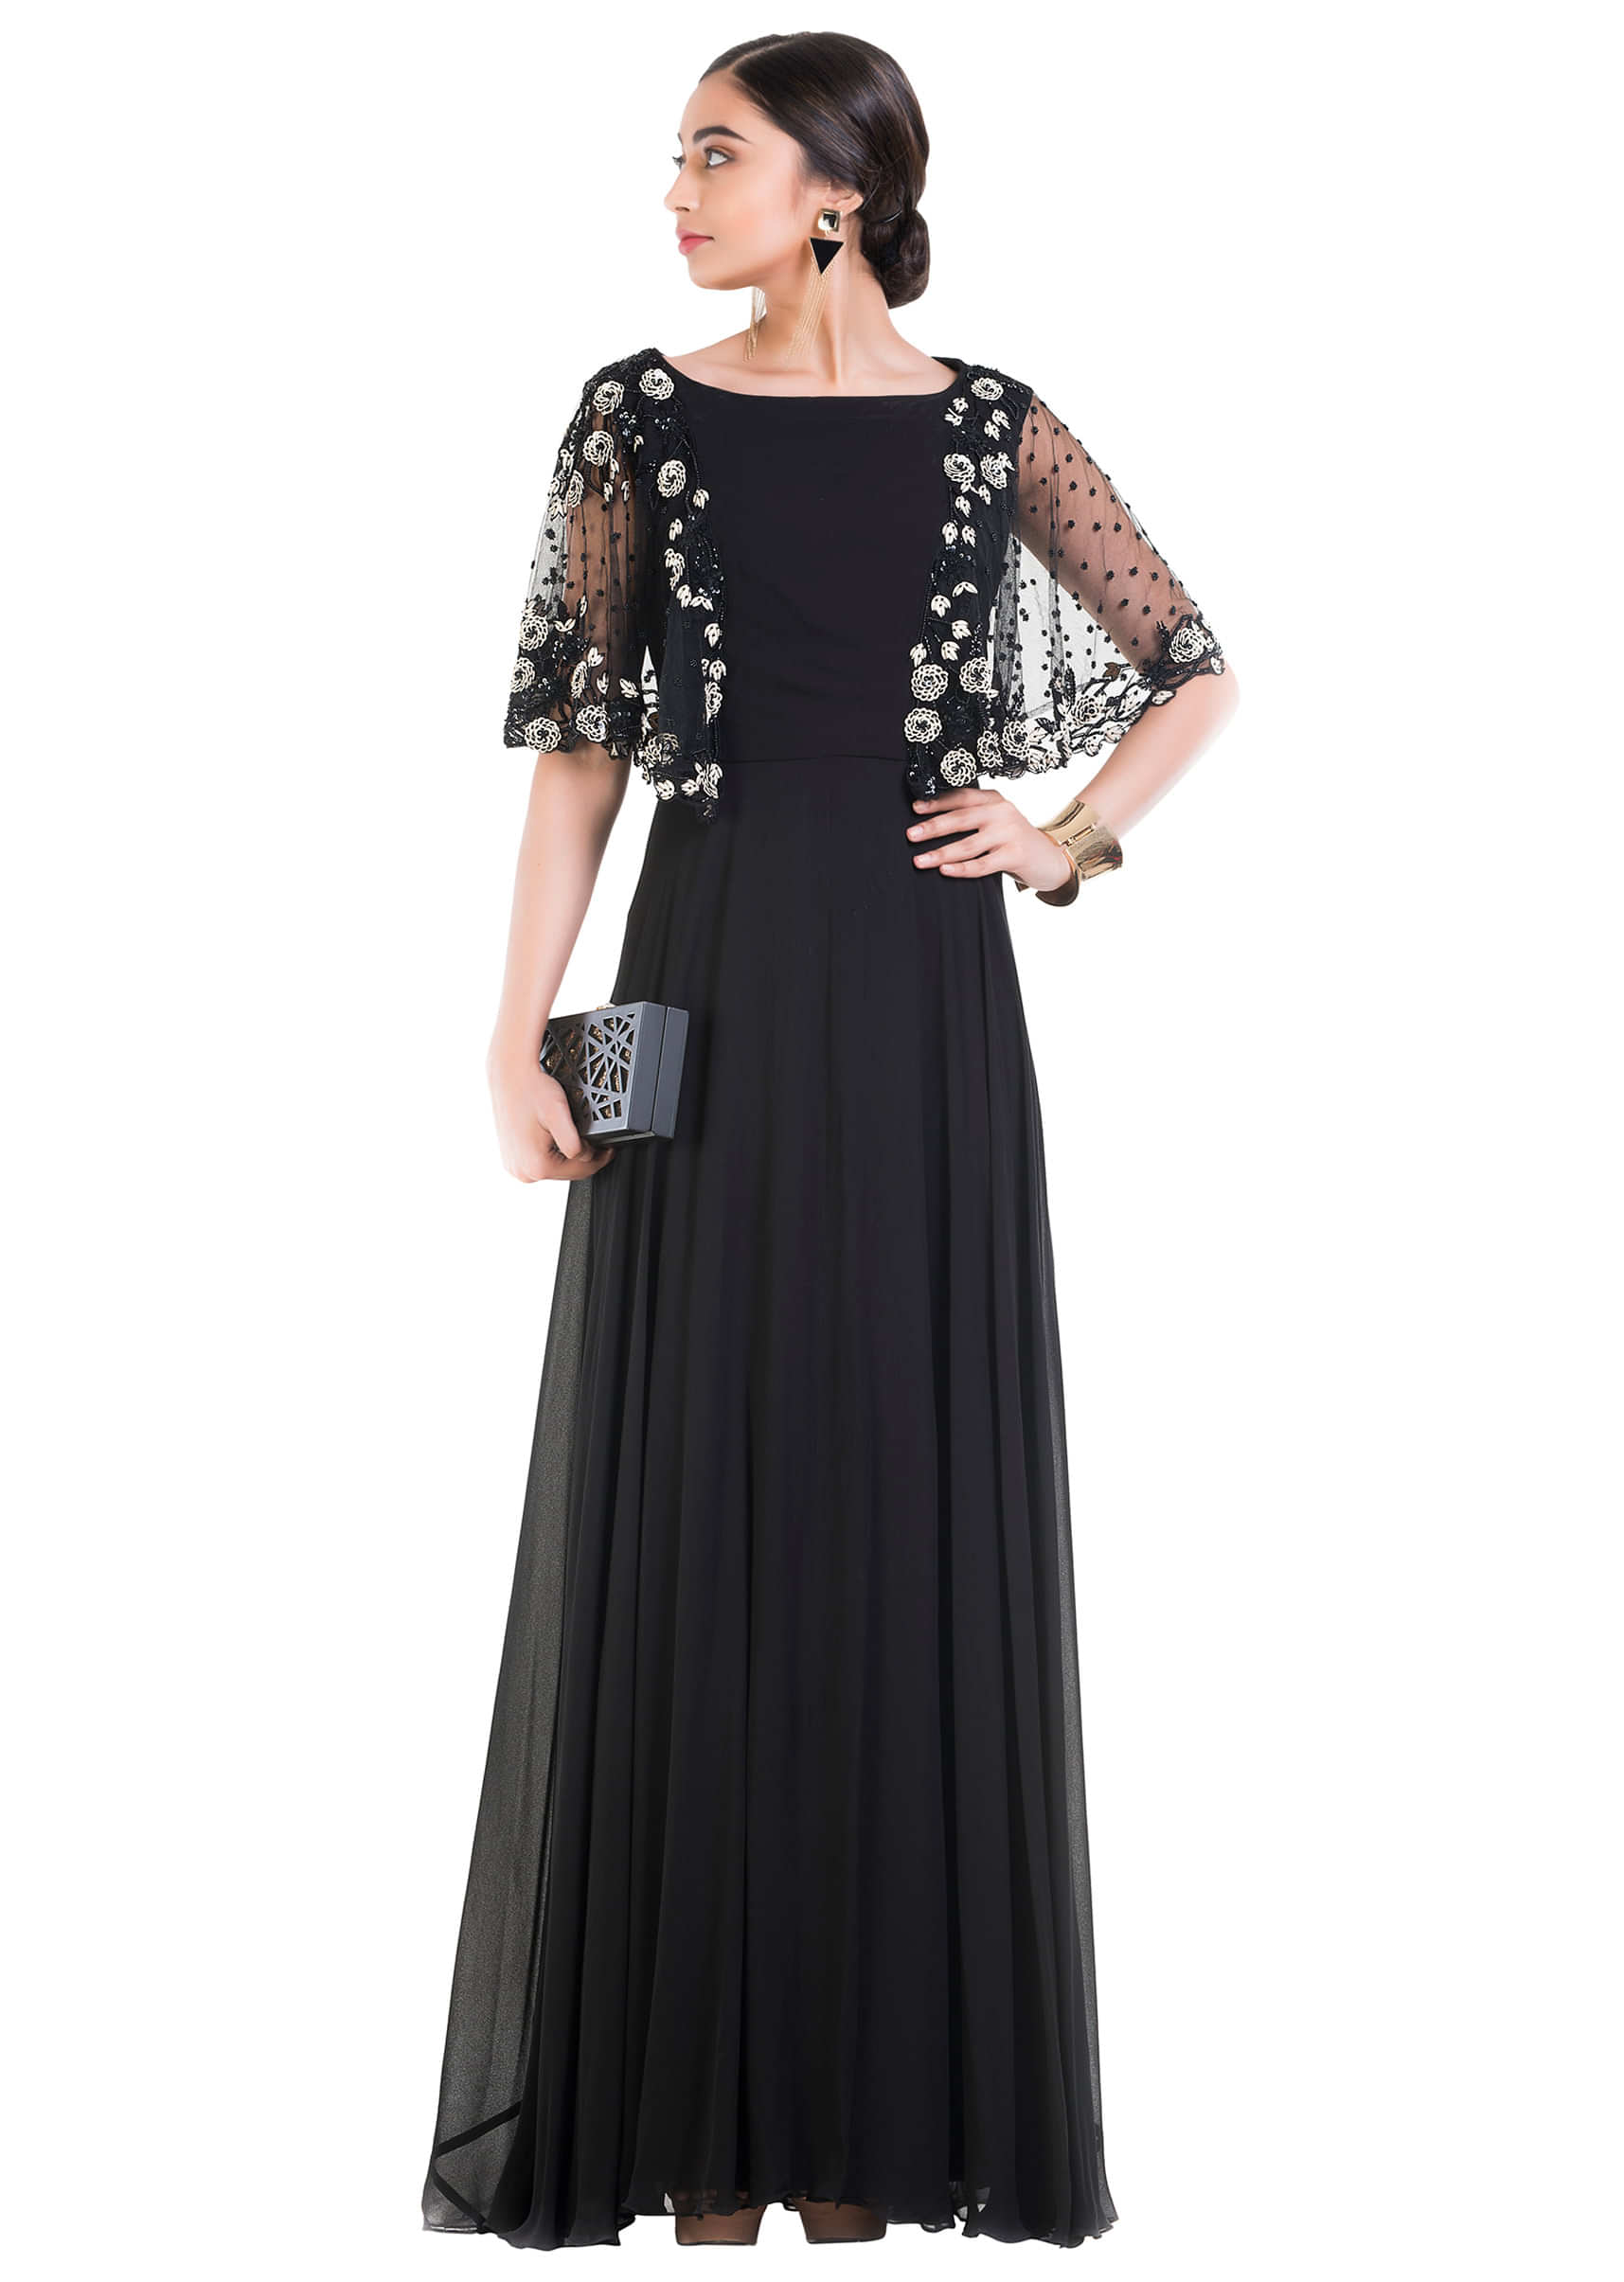 Jet Black Long Dress With Embroidered Half Cape